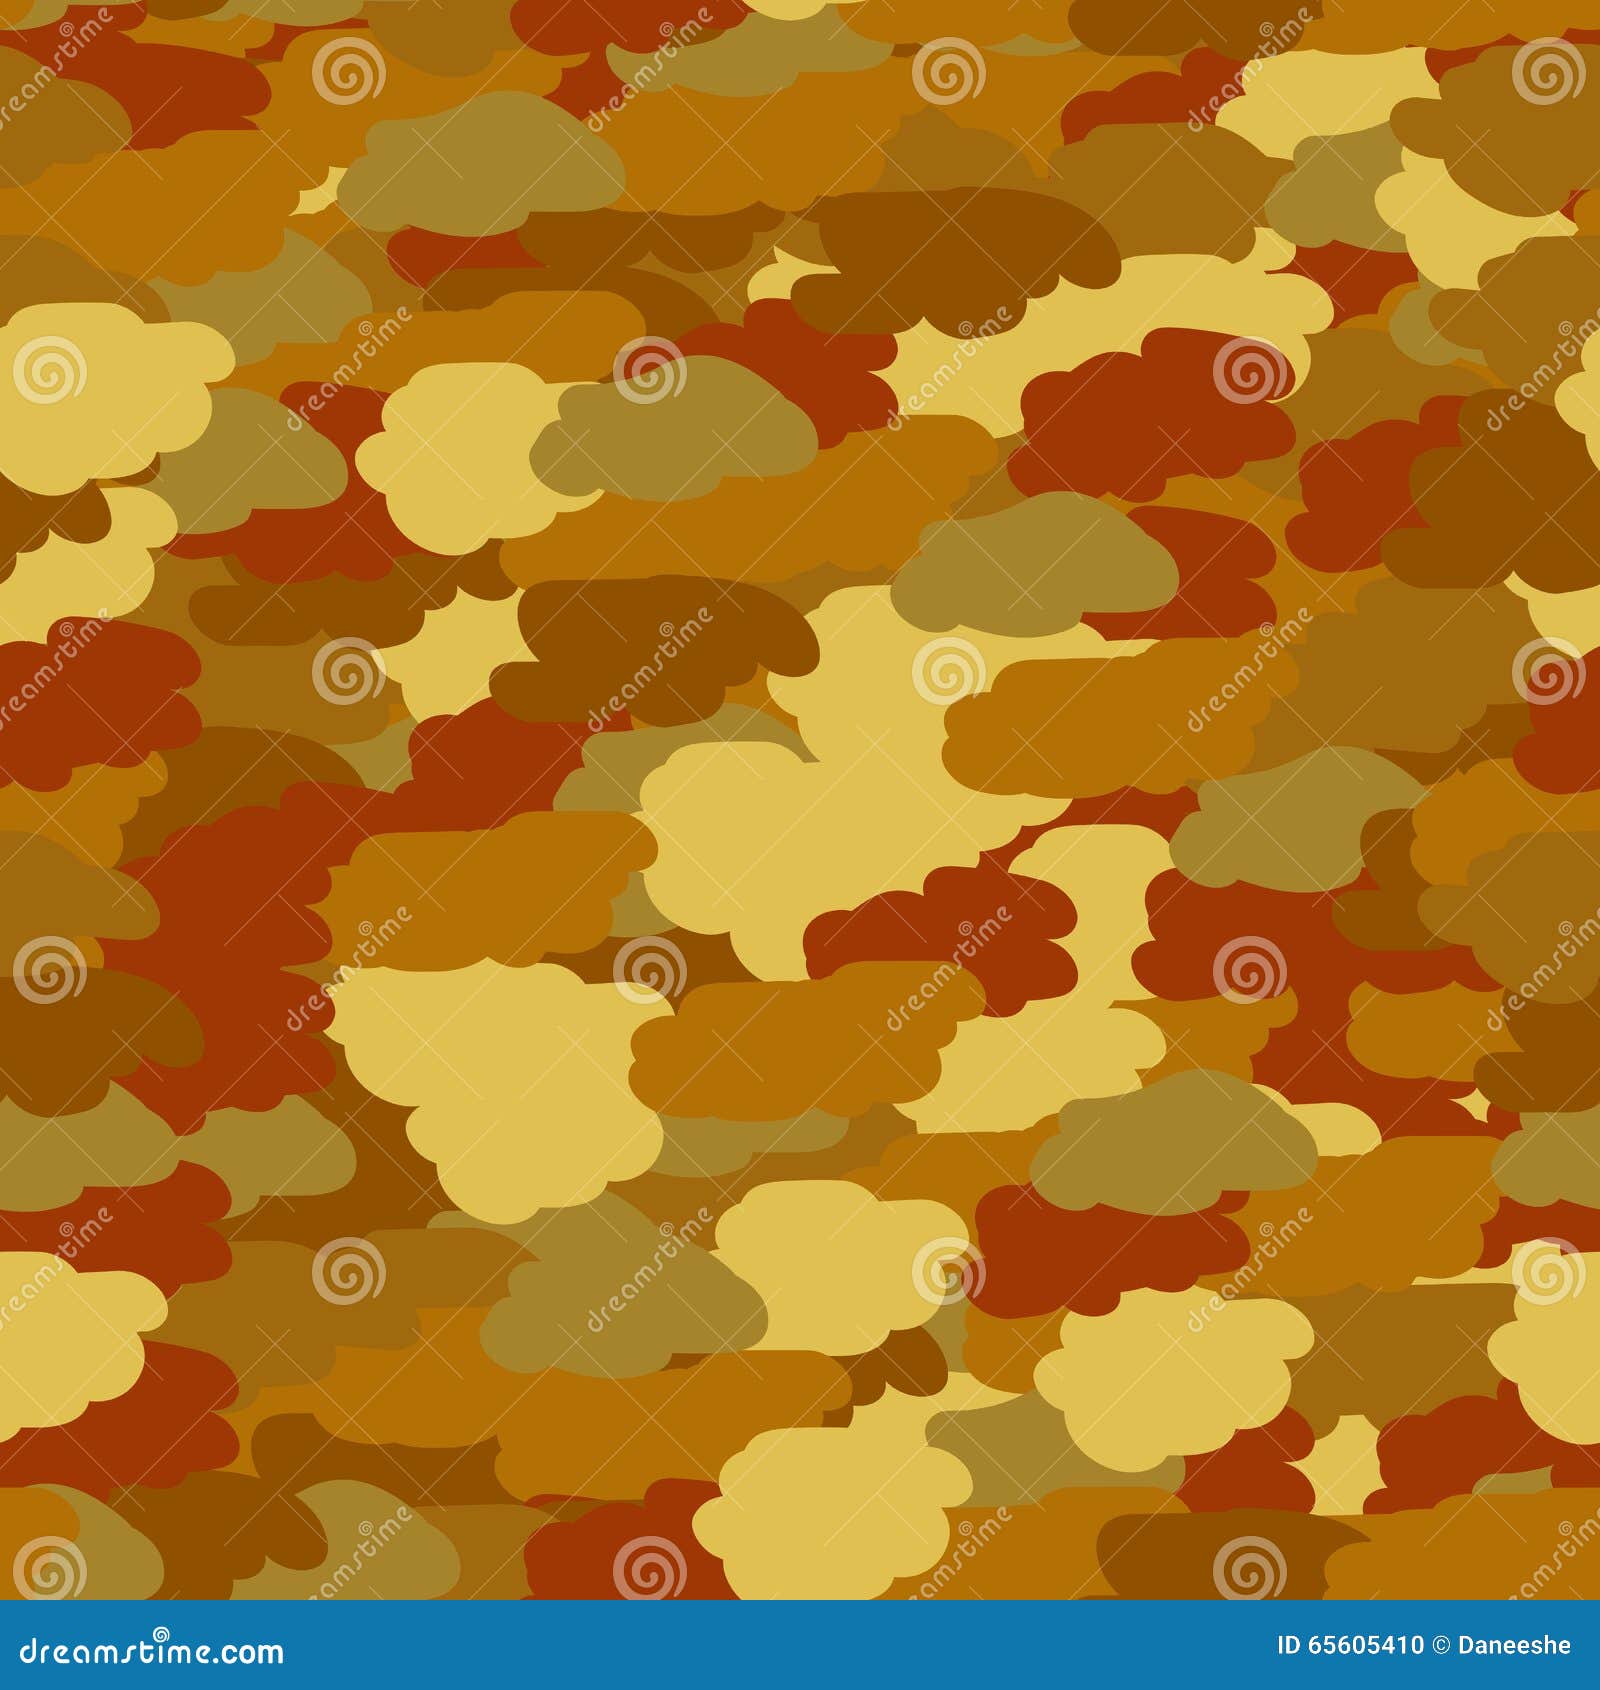 Seamless Background In Brown Khaki Colors Stock Vector - Illustration ...